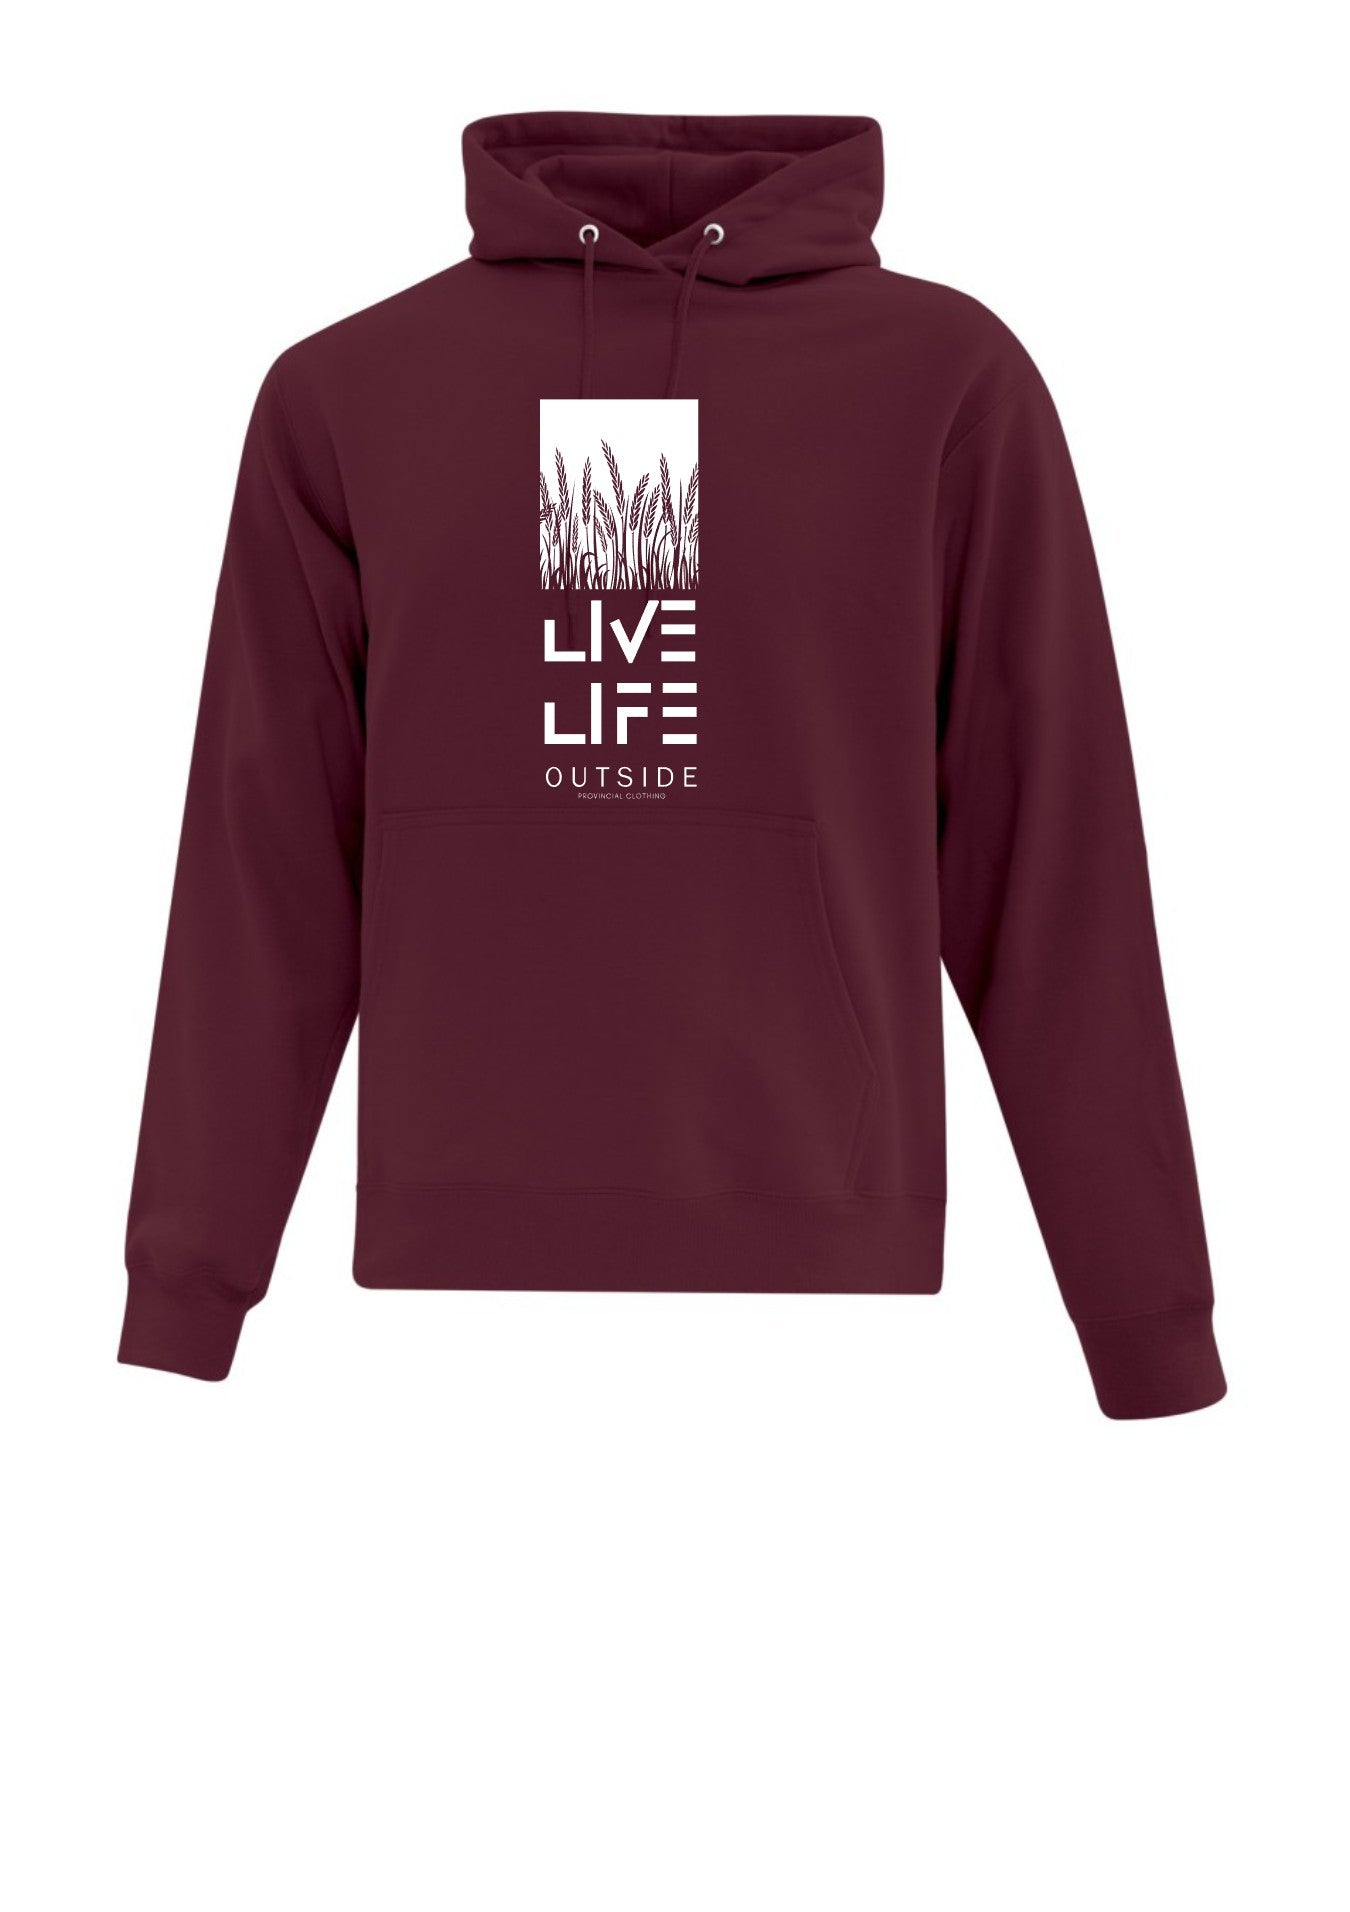 Live Life Outside- WHEAT New* *Brand – Clothing Hoodie Provincial